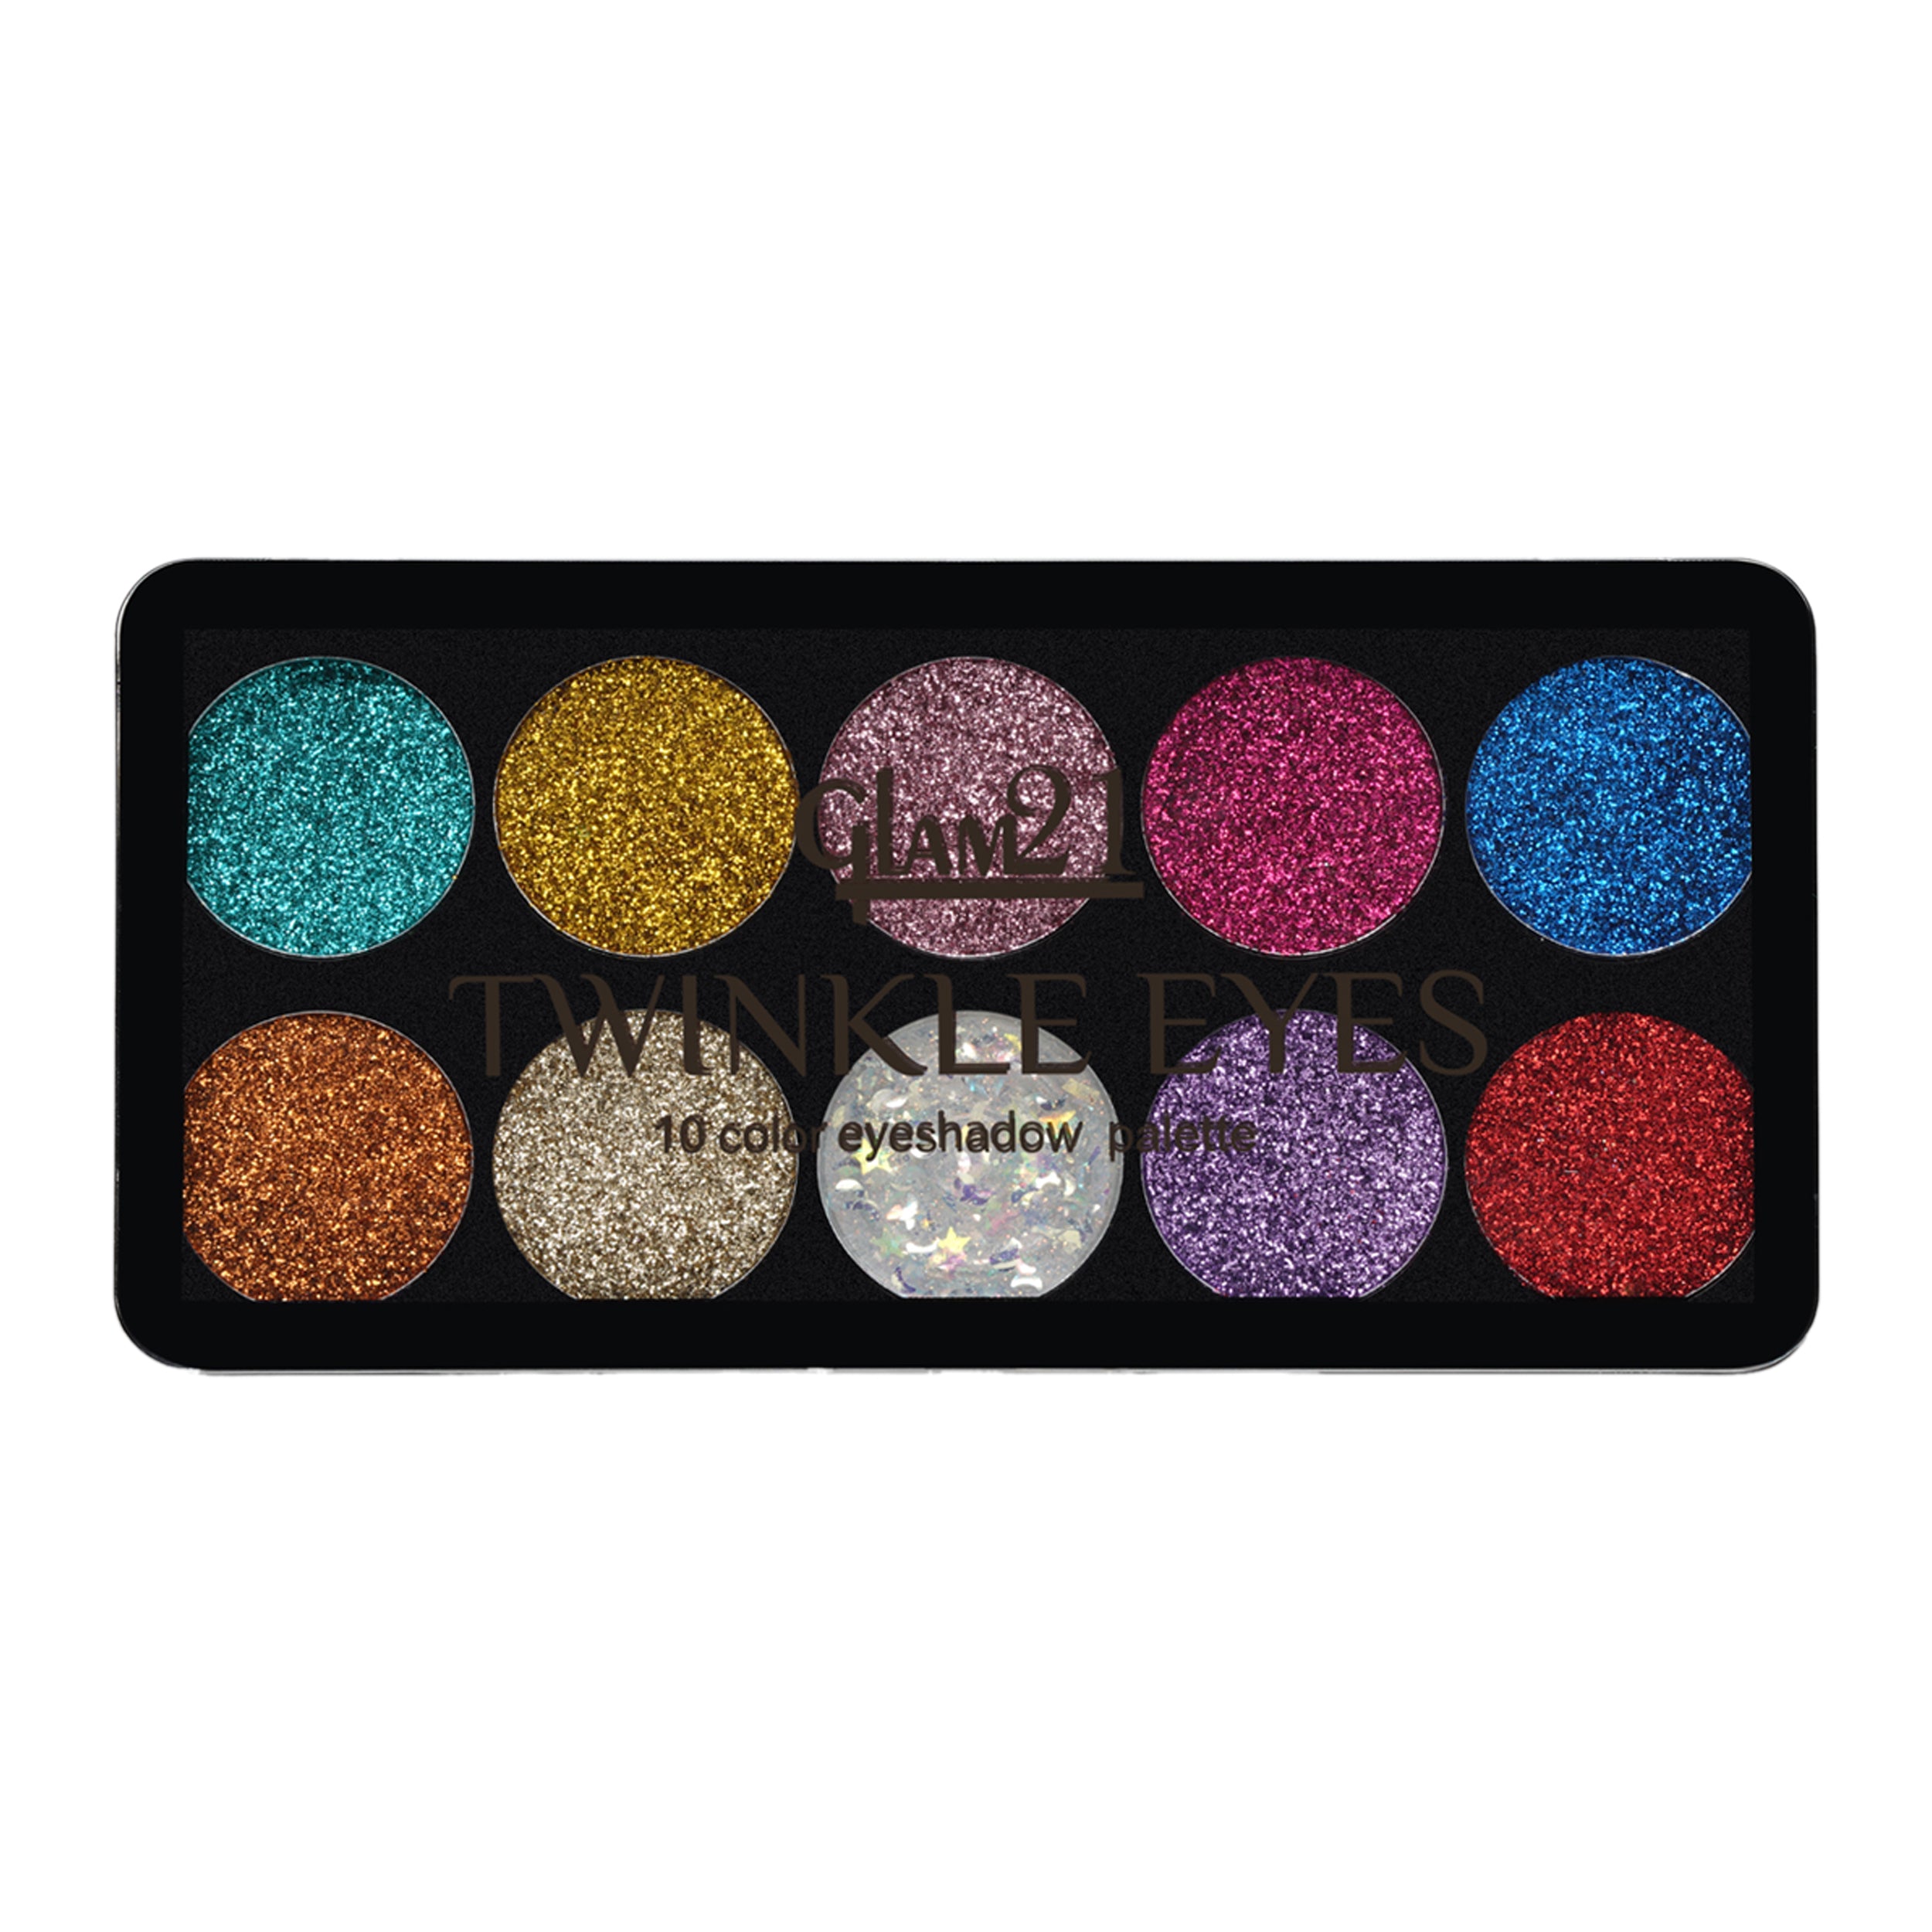 Glam21 Twinkle Eyes Glitter Palette|10 Cream Based Highly Pigmented Shades|Non Sticky Look -13gm-01-NA-13gm